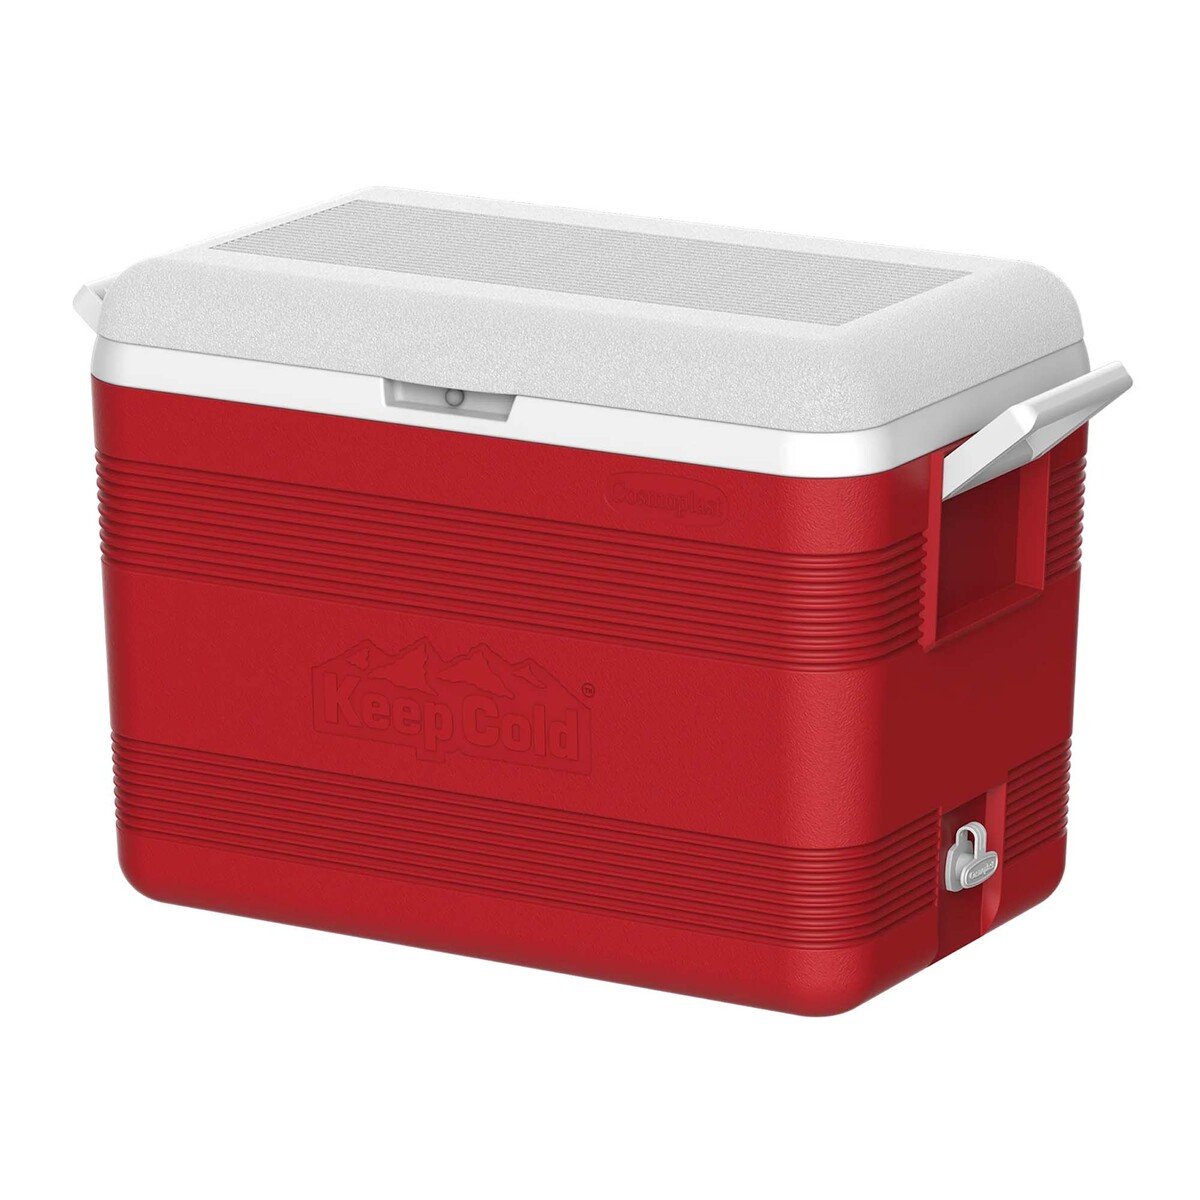 Keep Cold Deluxe Icebox MFIBXX010 40L Assorted Colors